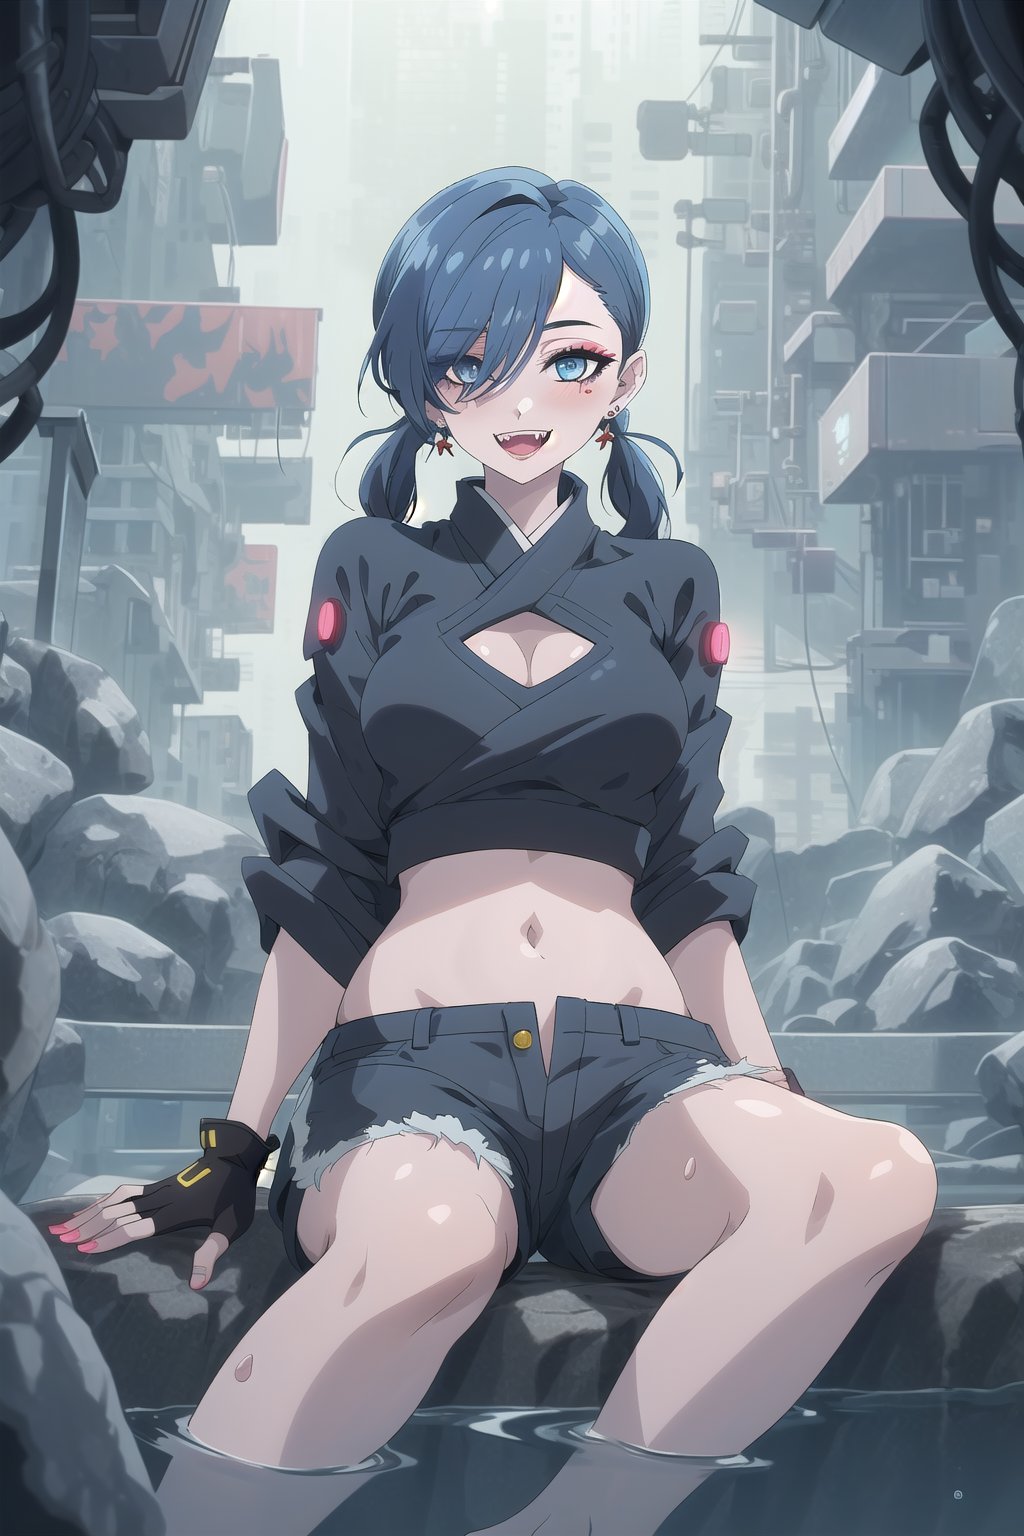 nier anime style illustration, best quality, masterpiece High resolution, good detail, bright colors, HDR, 4K. Dolby vision high. 

Girl with long straight black hair, long twin pigtails (hair covering one eye), blue eyes, blushing, blue earrings 

Stylish Cyberpunk Black Crop Top 

Showing navel, exposed navel 

Elegant cyberpunk black shorts

Barefoot

Inside an underground cave 

Blue illumination in the depth of underground water 

Sitting on a rock 

Black Stylish Fingerless Cyberpunk Gloves

Blue natural lighting

Flirty smile (yandere smile). Happy, excited. Open mouth 

Showing fangs, exposed fangs

jirai kei makeup

jirai kei makeup

Black hair